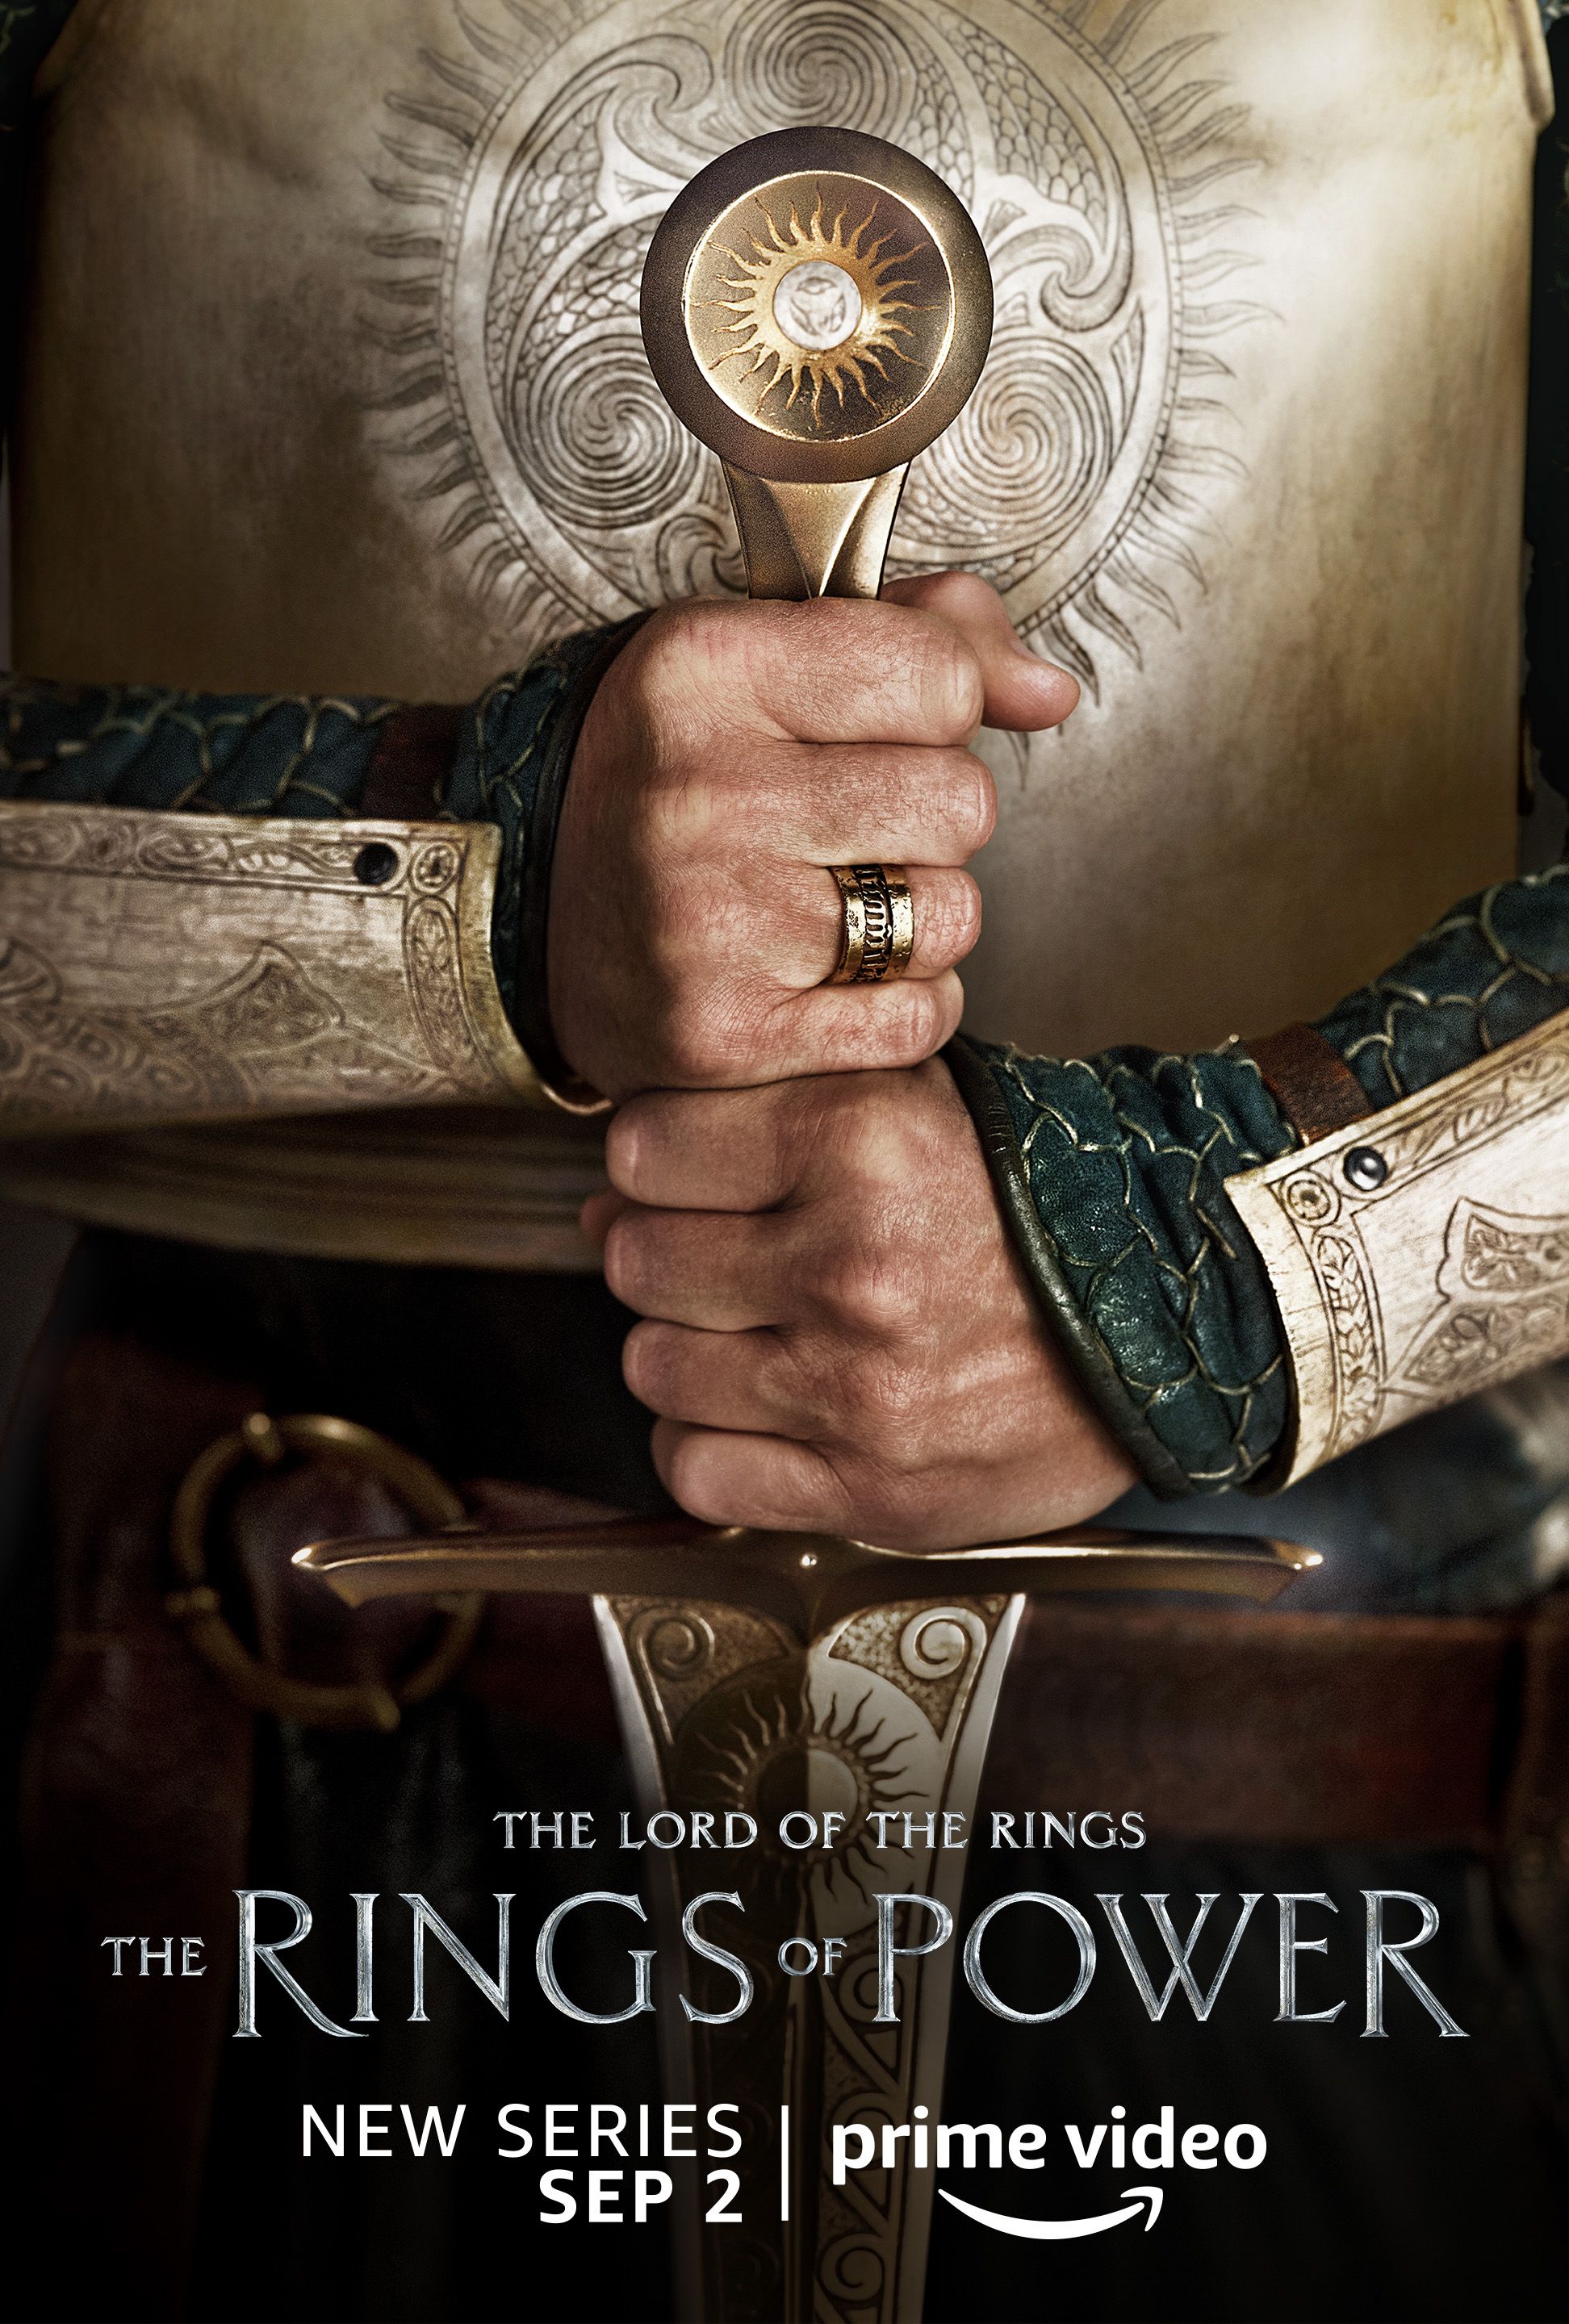 When Will Lord Of The Rings: The Rings Of Power Season 2 Be Released?